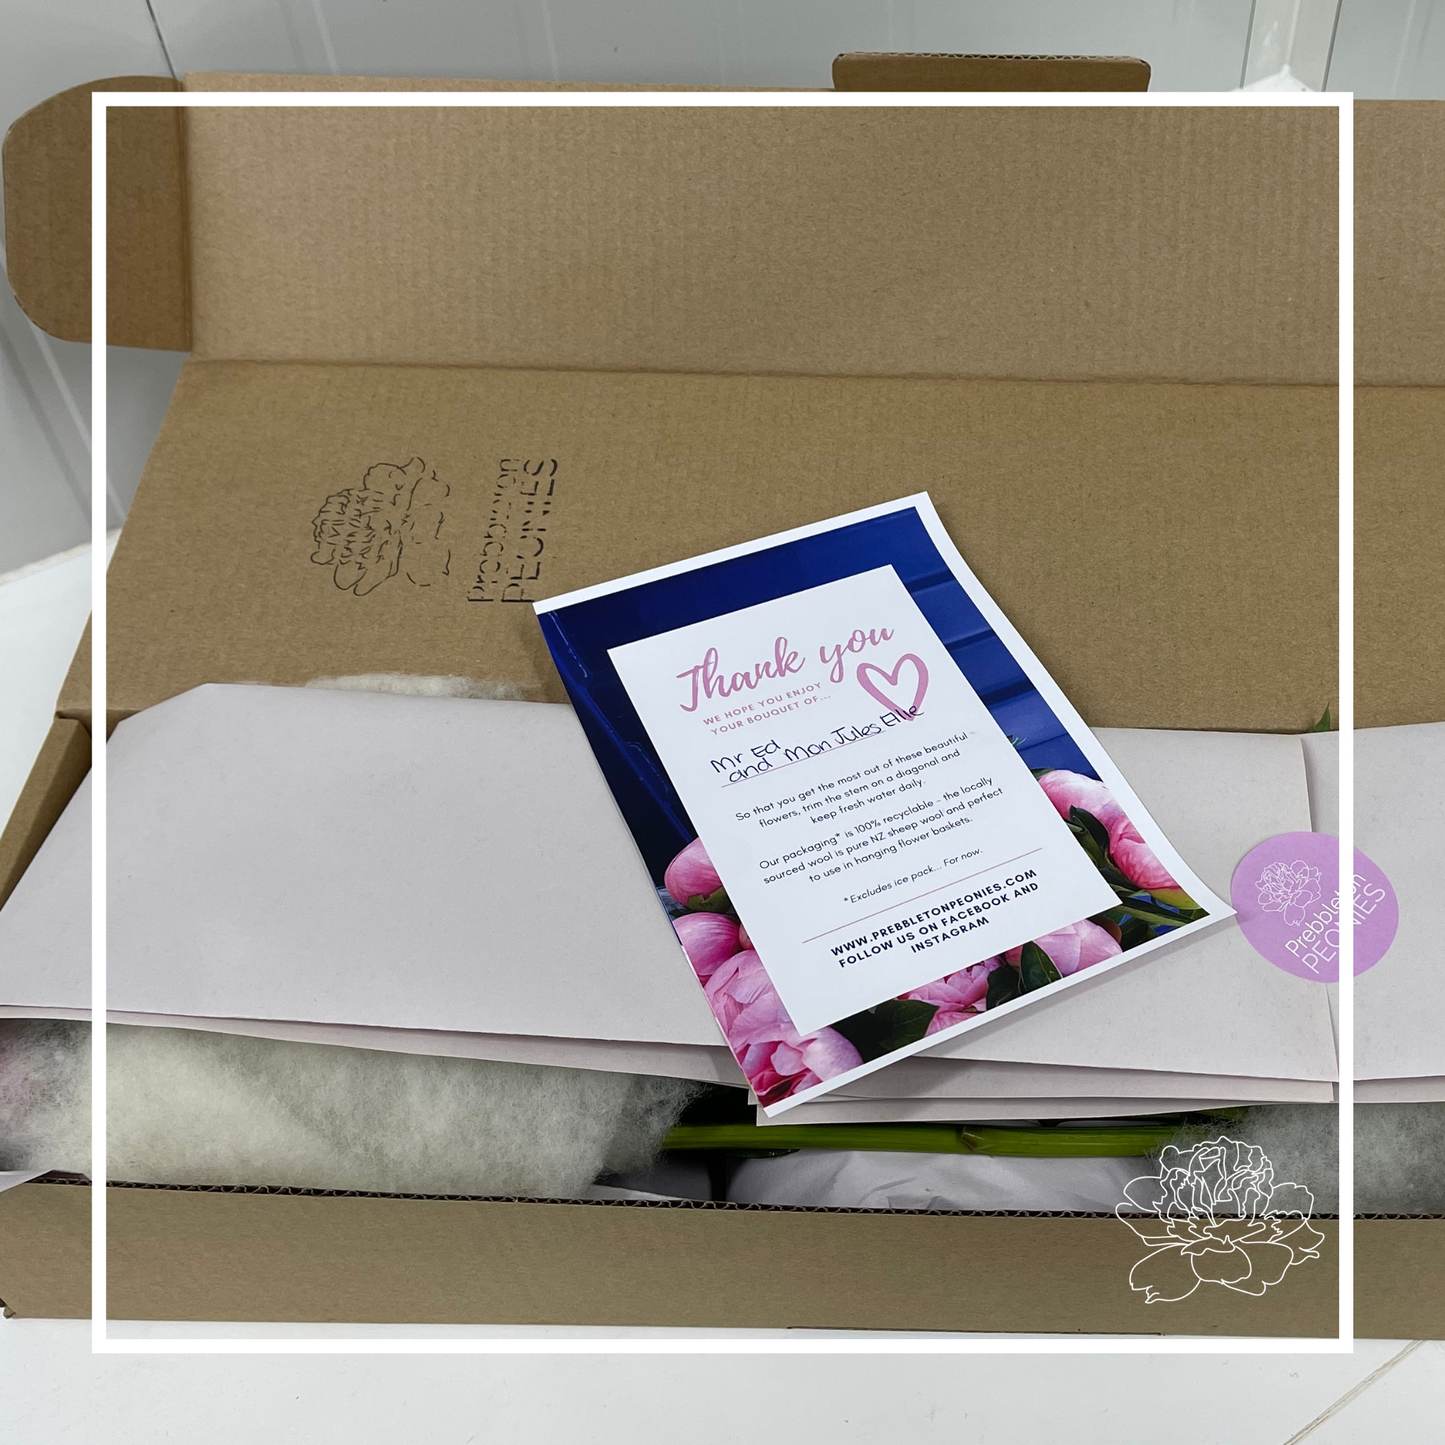 half packaged delivery box for peonies. An A4 flyer lays over the top of the packaging to show a hand written note. the brown box shows hints of the flowers inside along with wool and paper packaging to protect the flower. a black logo is stamped on the top of the box. The image is framed in a white box graphic with the prebbleton peonies logo on the bottom right corner. 